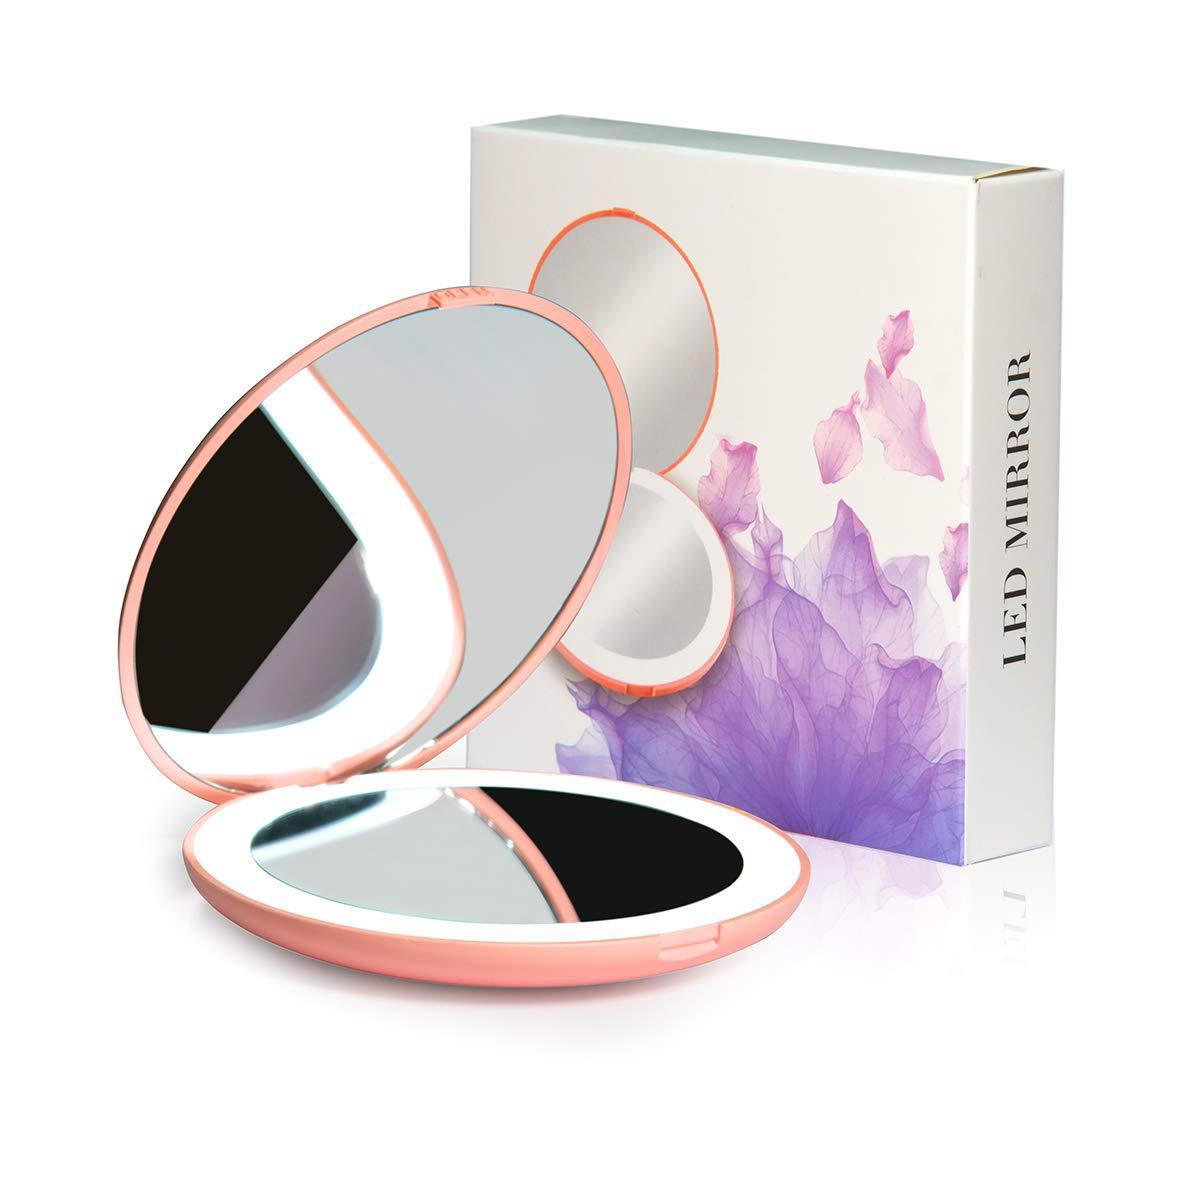 Glow up anywhere! Portable Compact LED Makeup Mirror for flawless touch-ups on the go. image 1